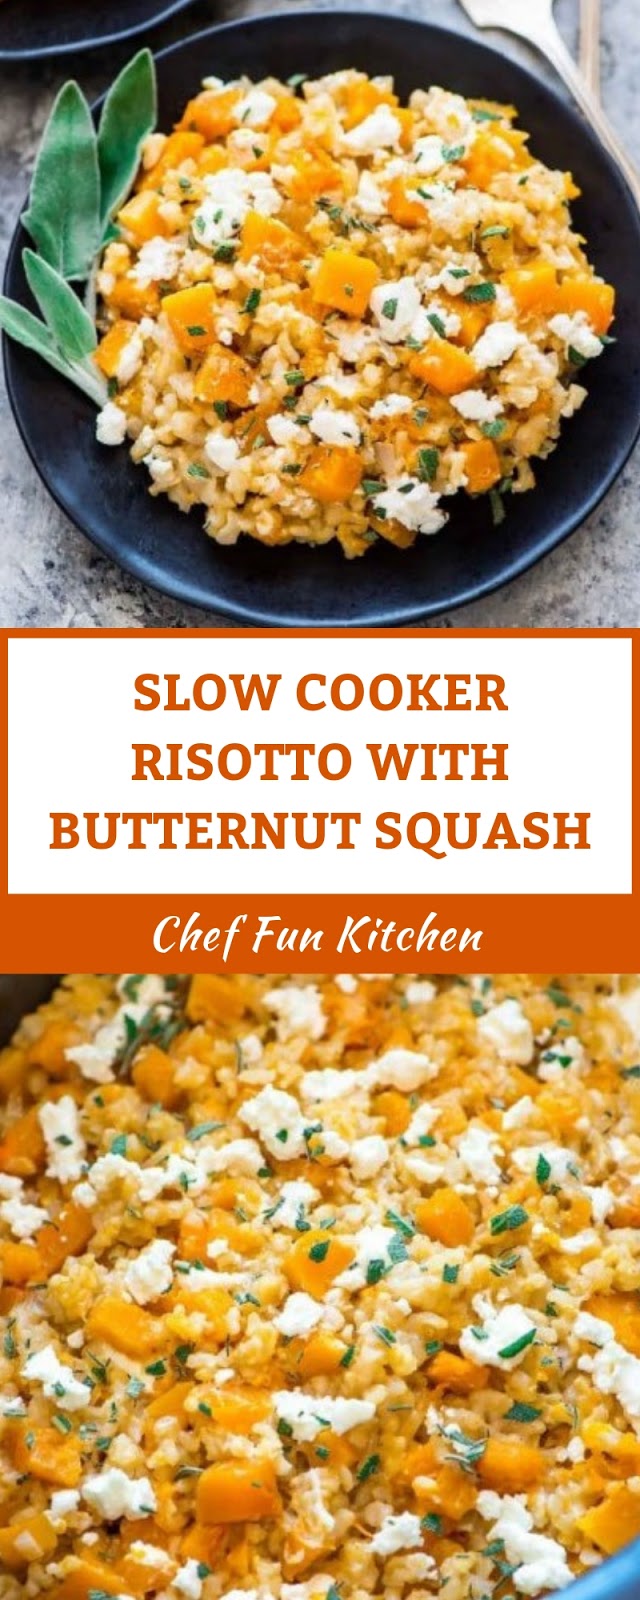 SLOW COOKER RISOTTO WITH BUTTERNUT SQUASH